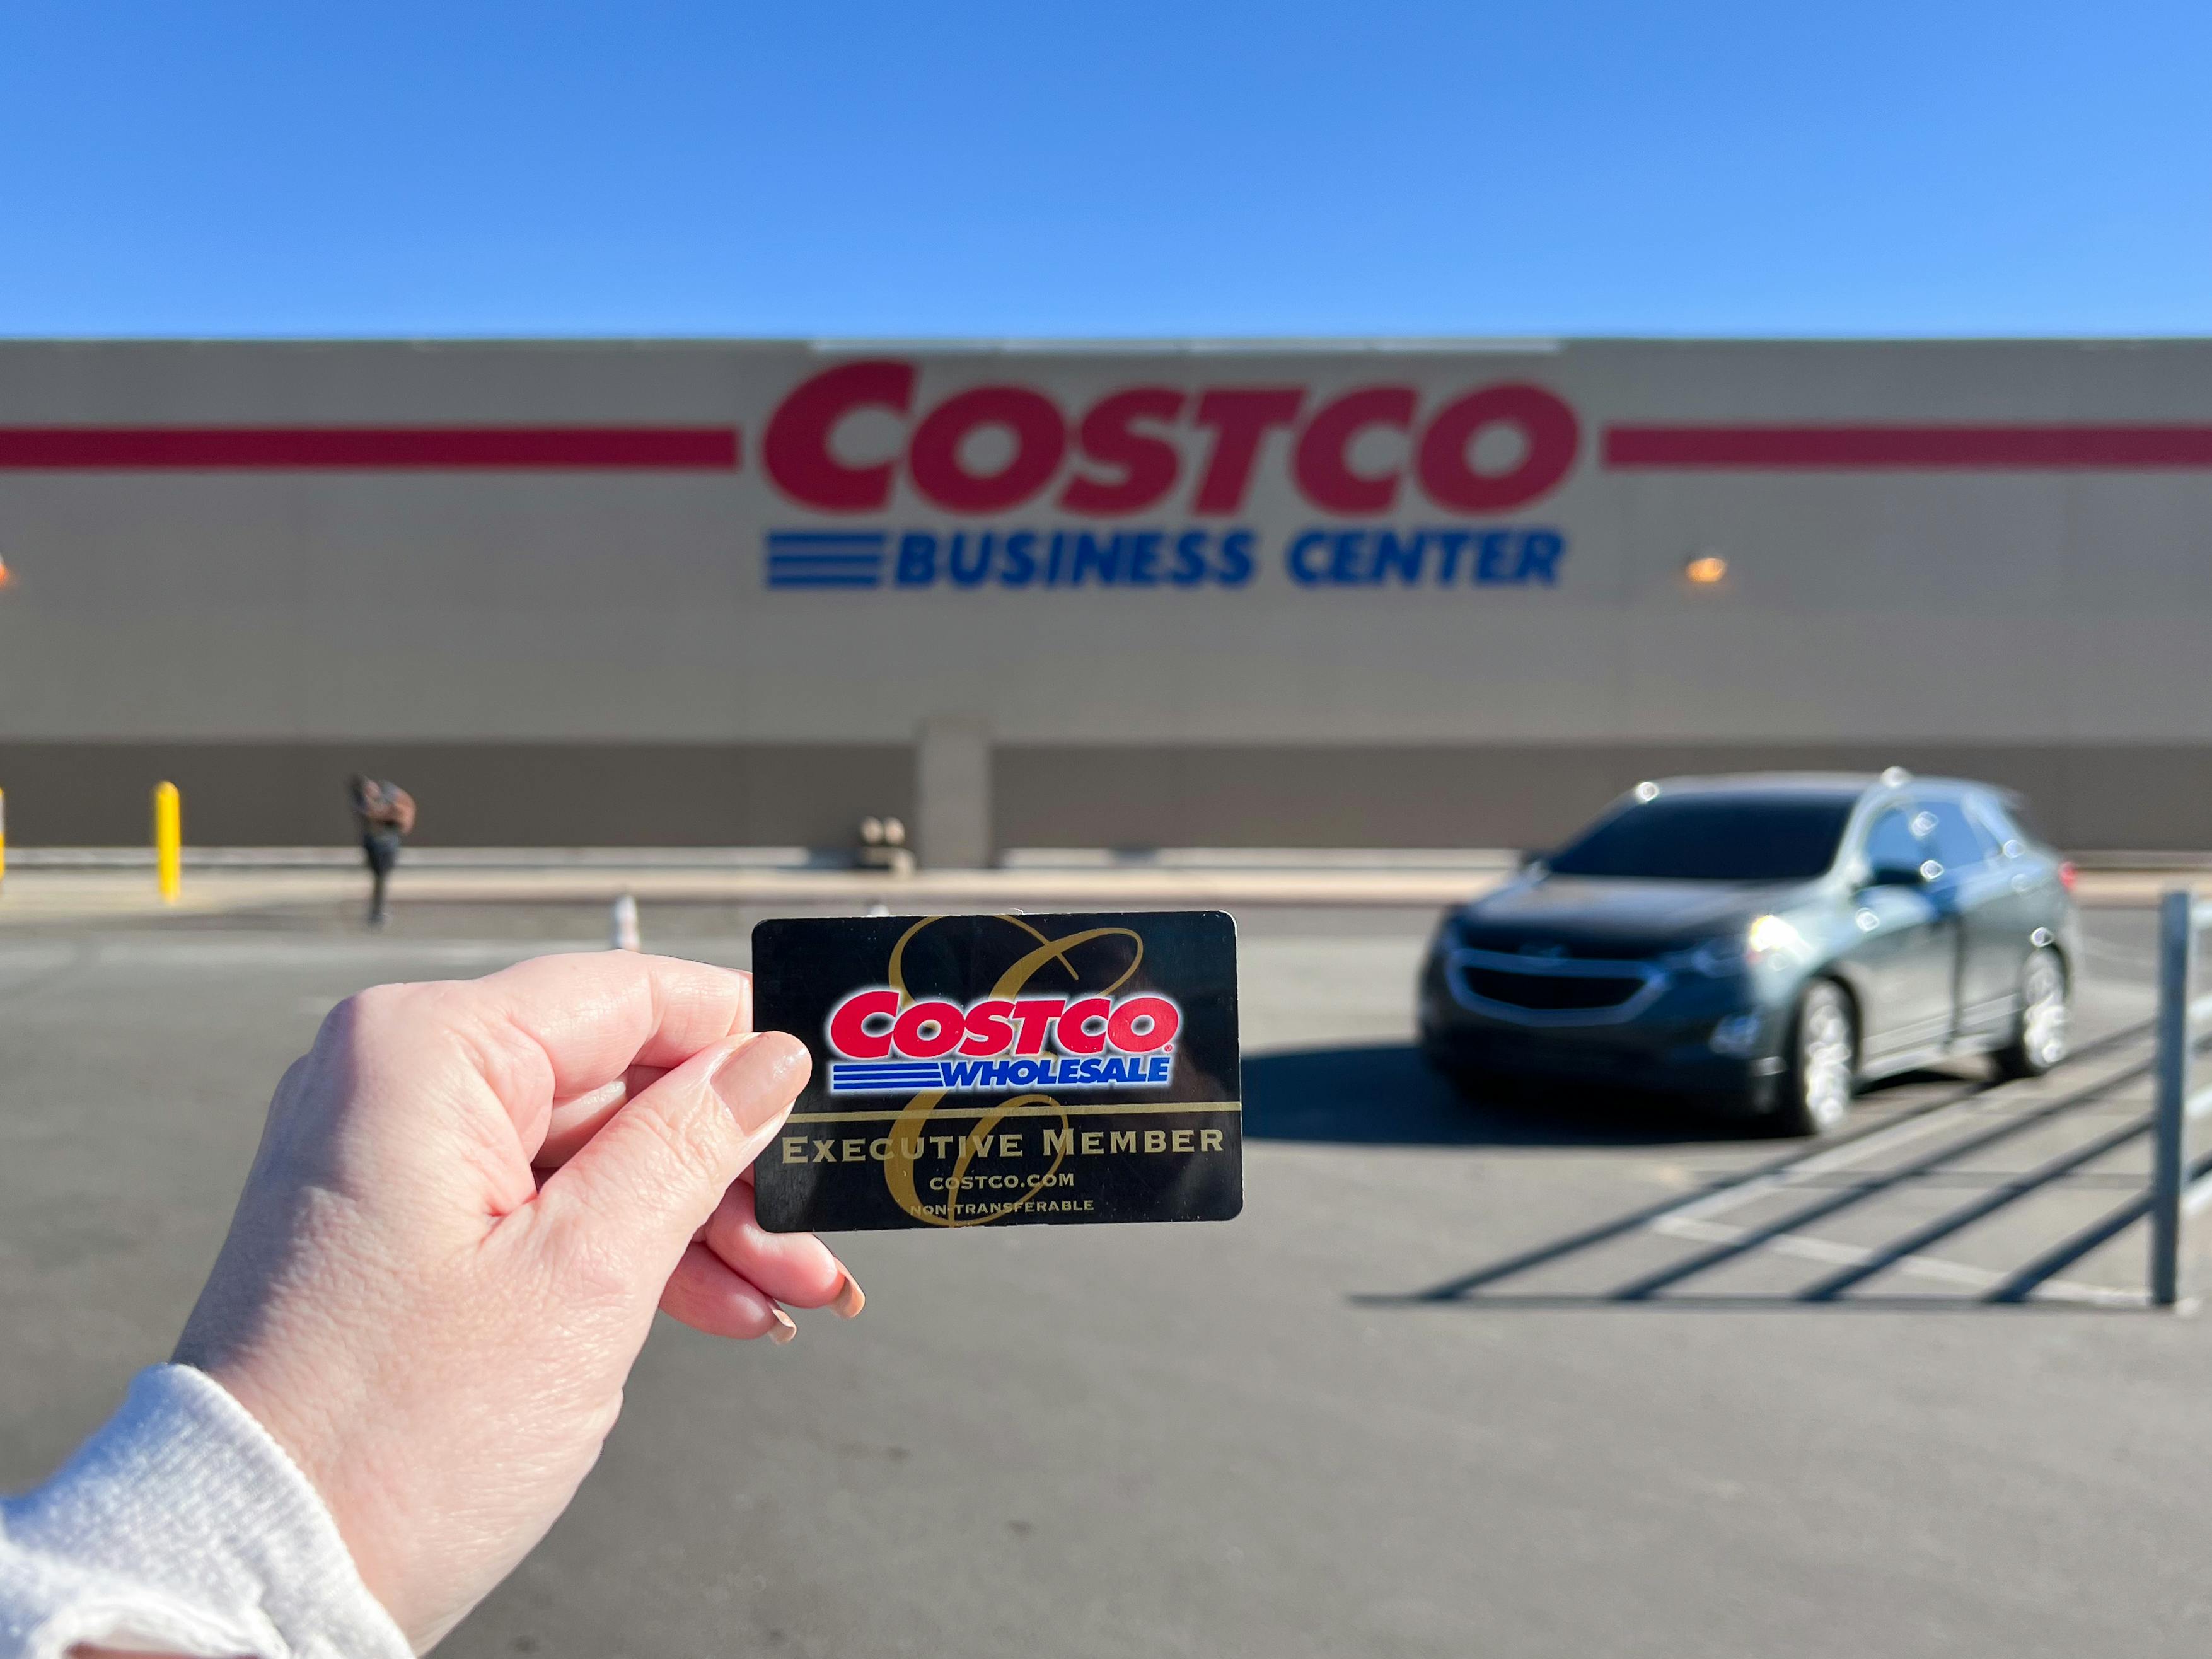 Someone holding up their Costco membership card in front of a Costco Business Center